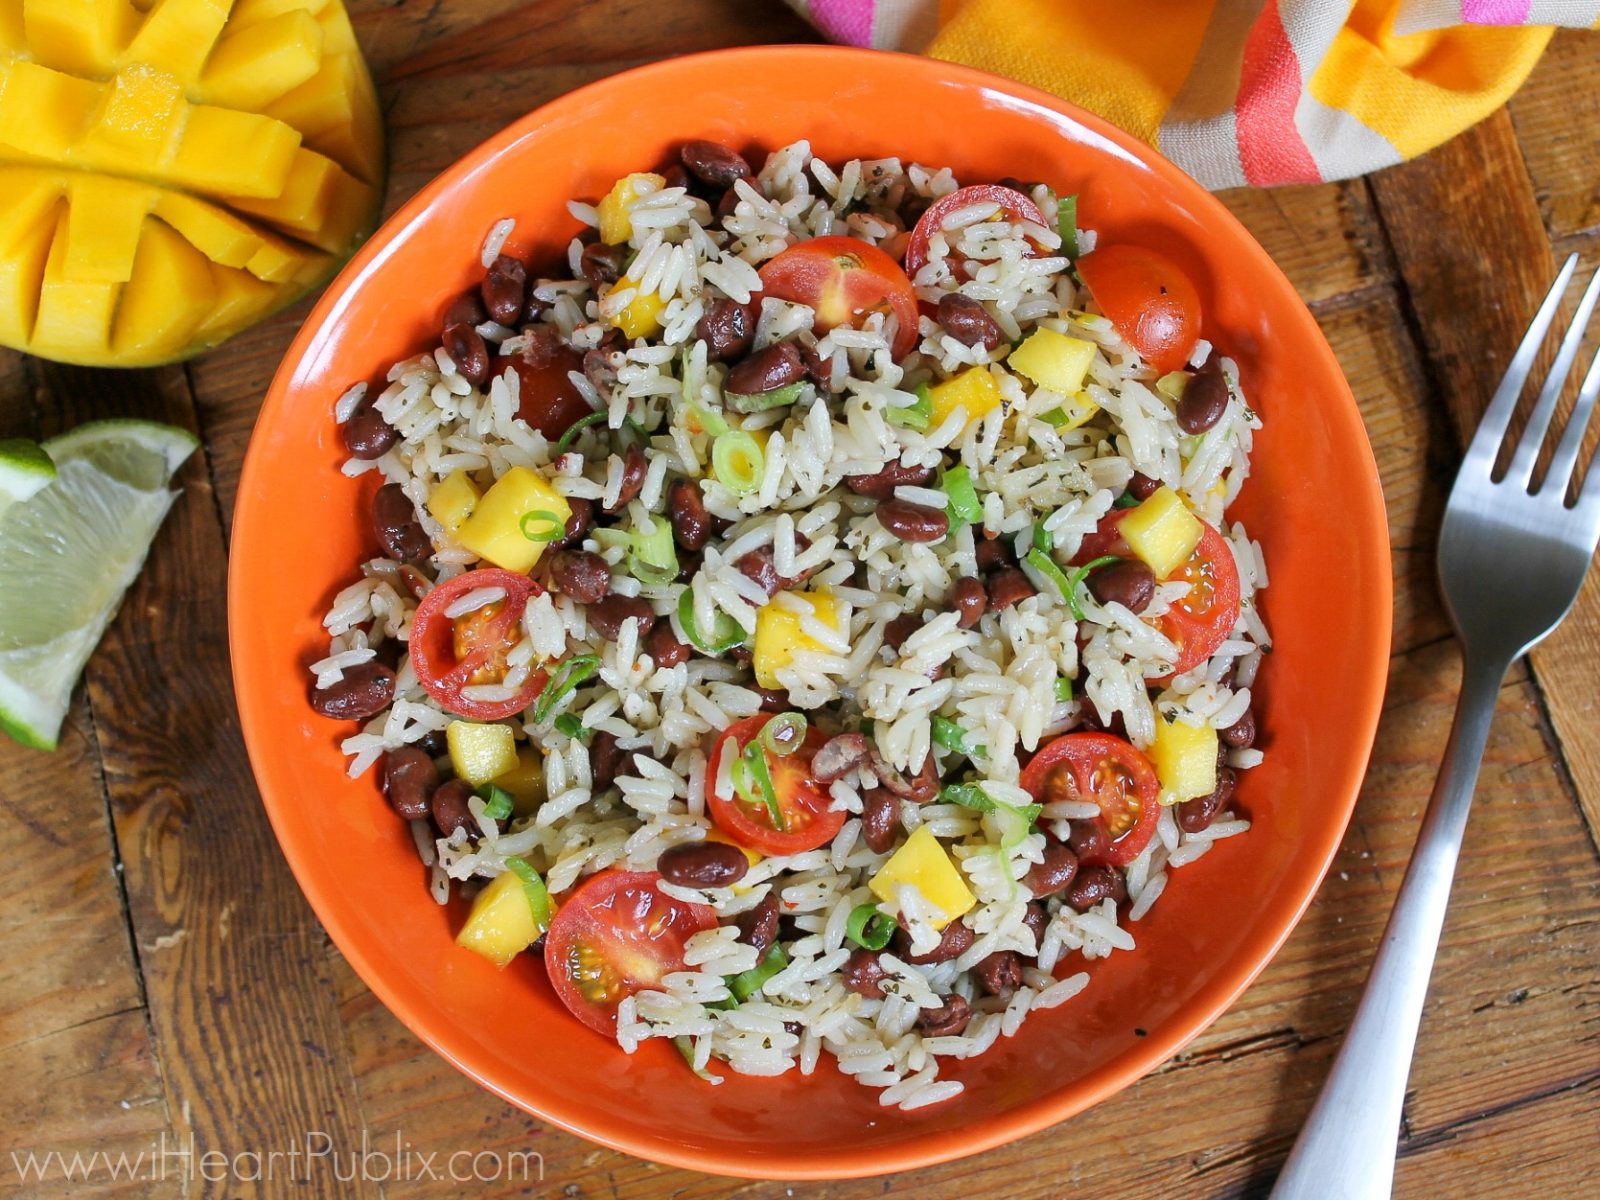 Black Beans and Rice Mango Salad – Fantastic Recipe For The Minute Ready To Serve Sale At Publix